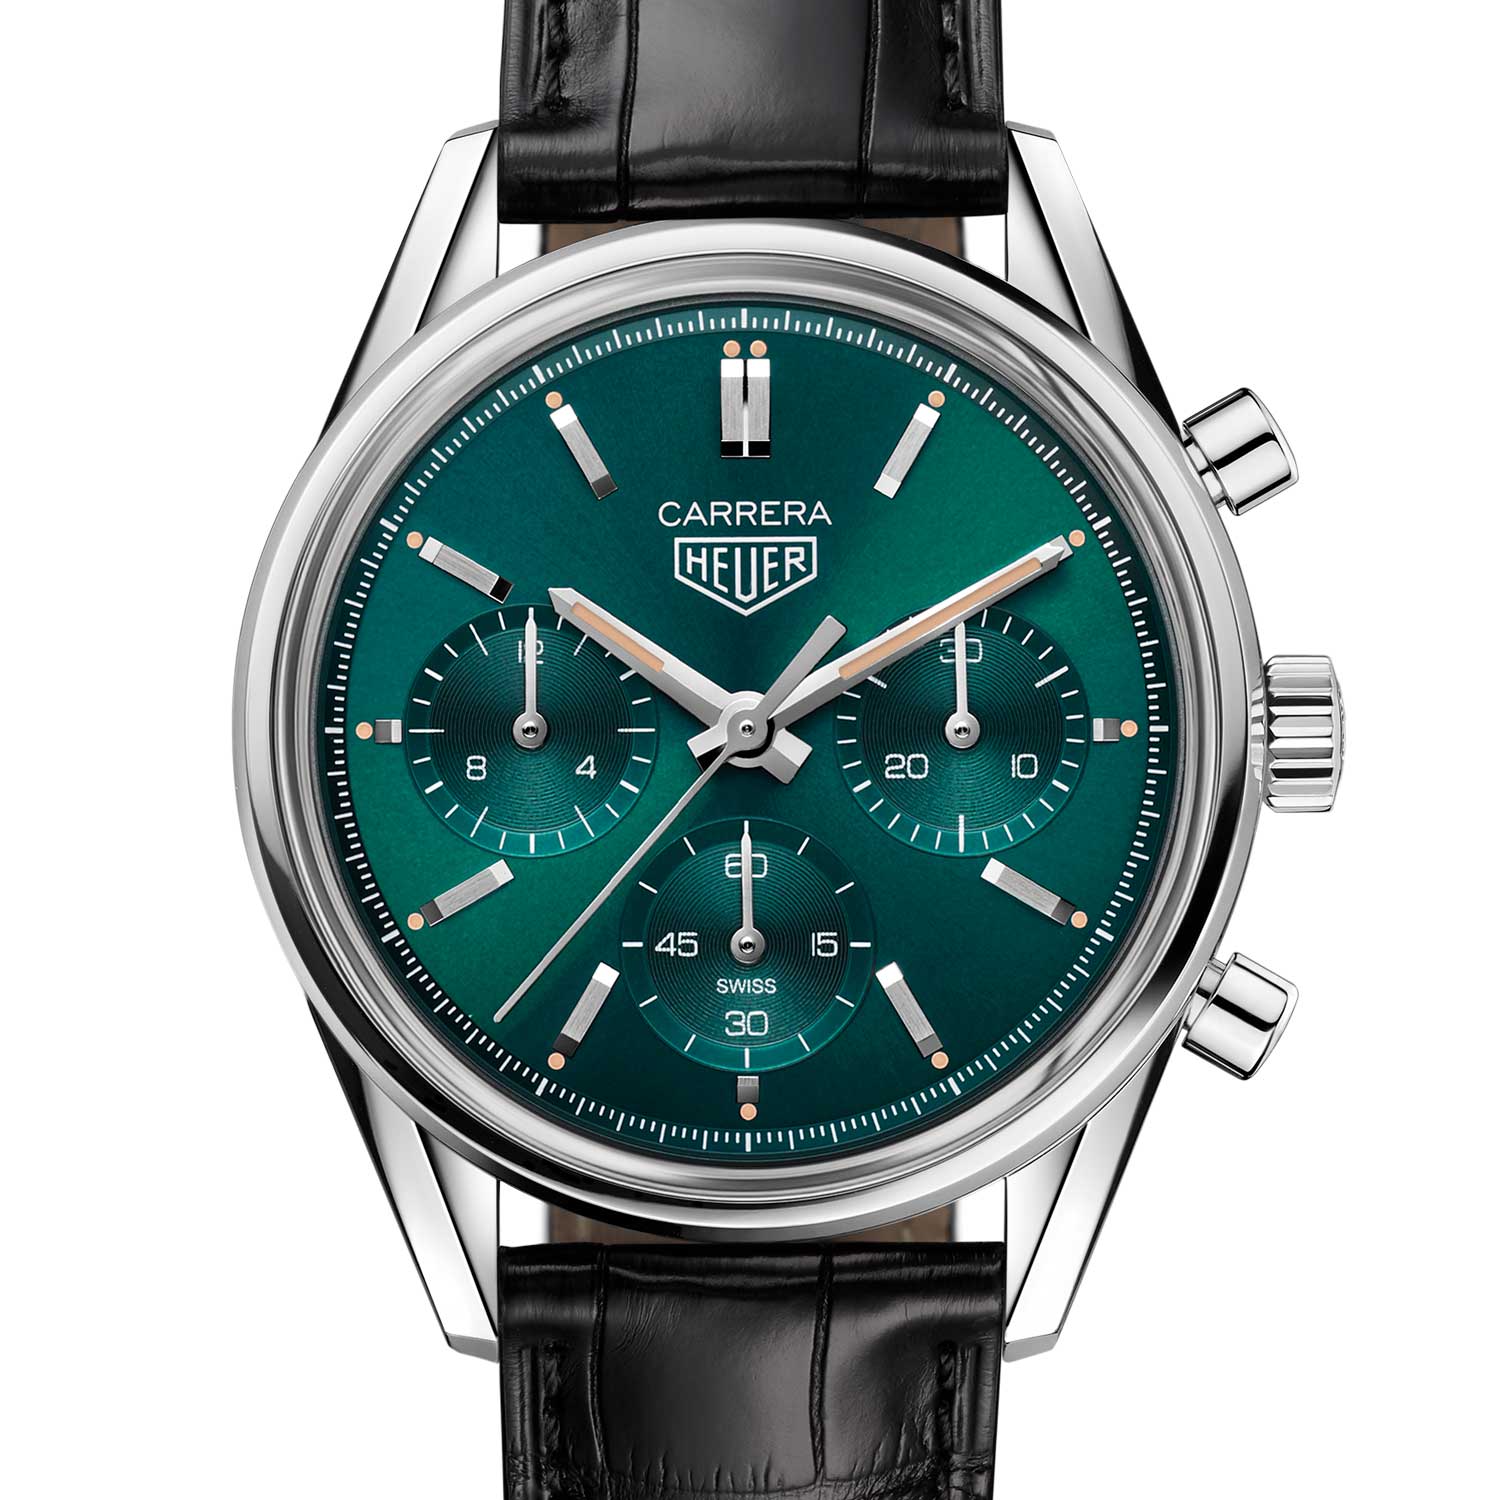 The new TAG Heuer Carrera Green is limited to 500 pieces